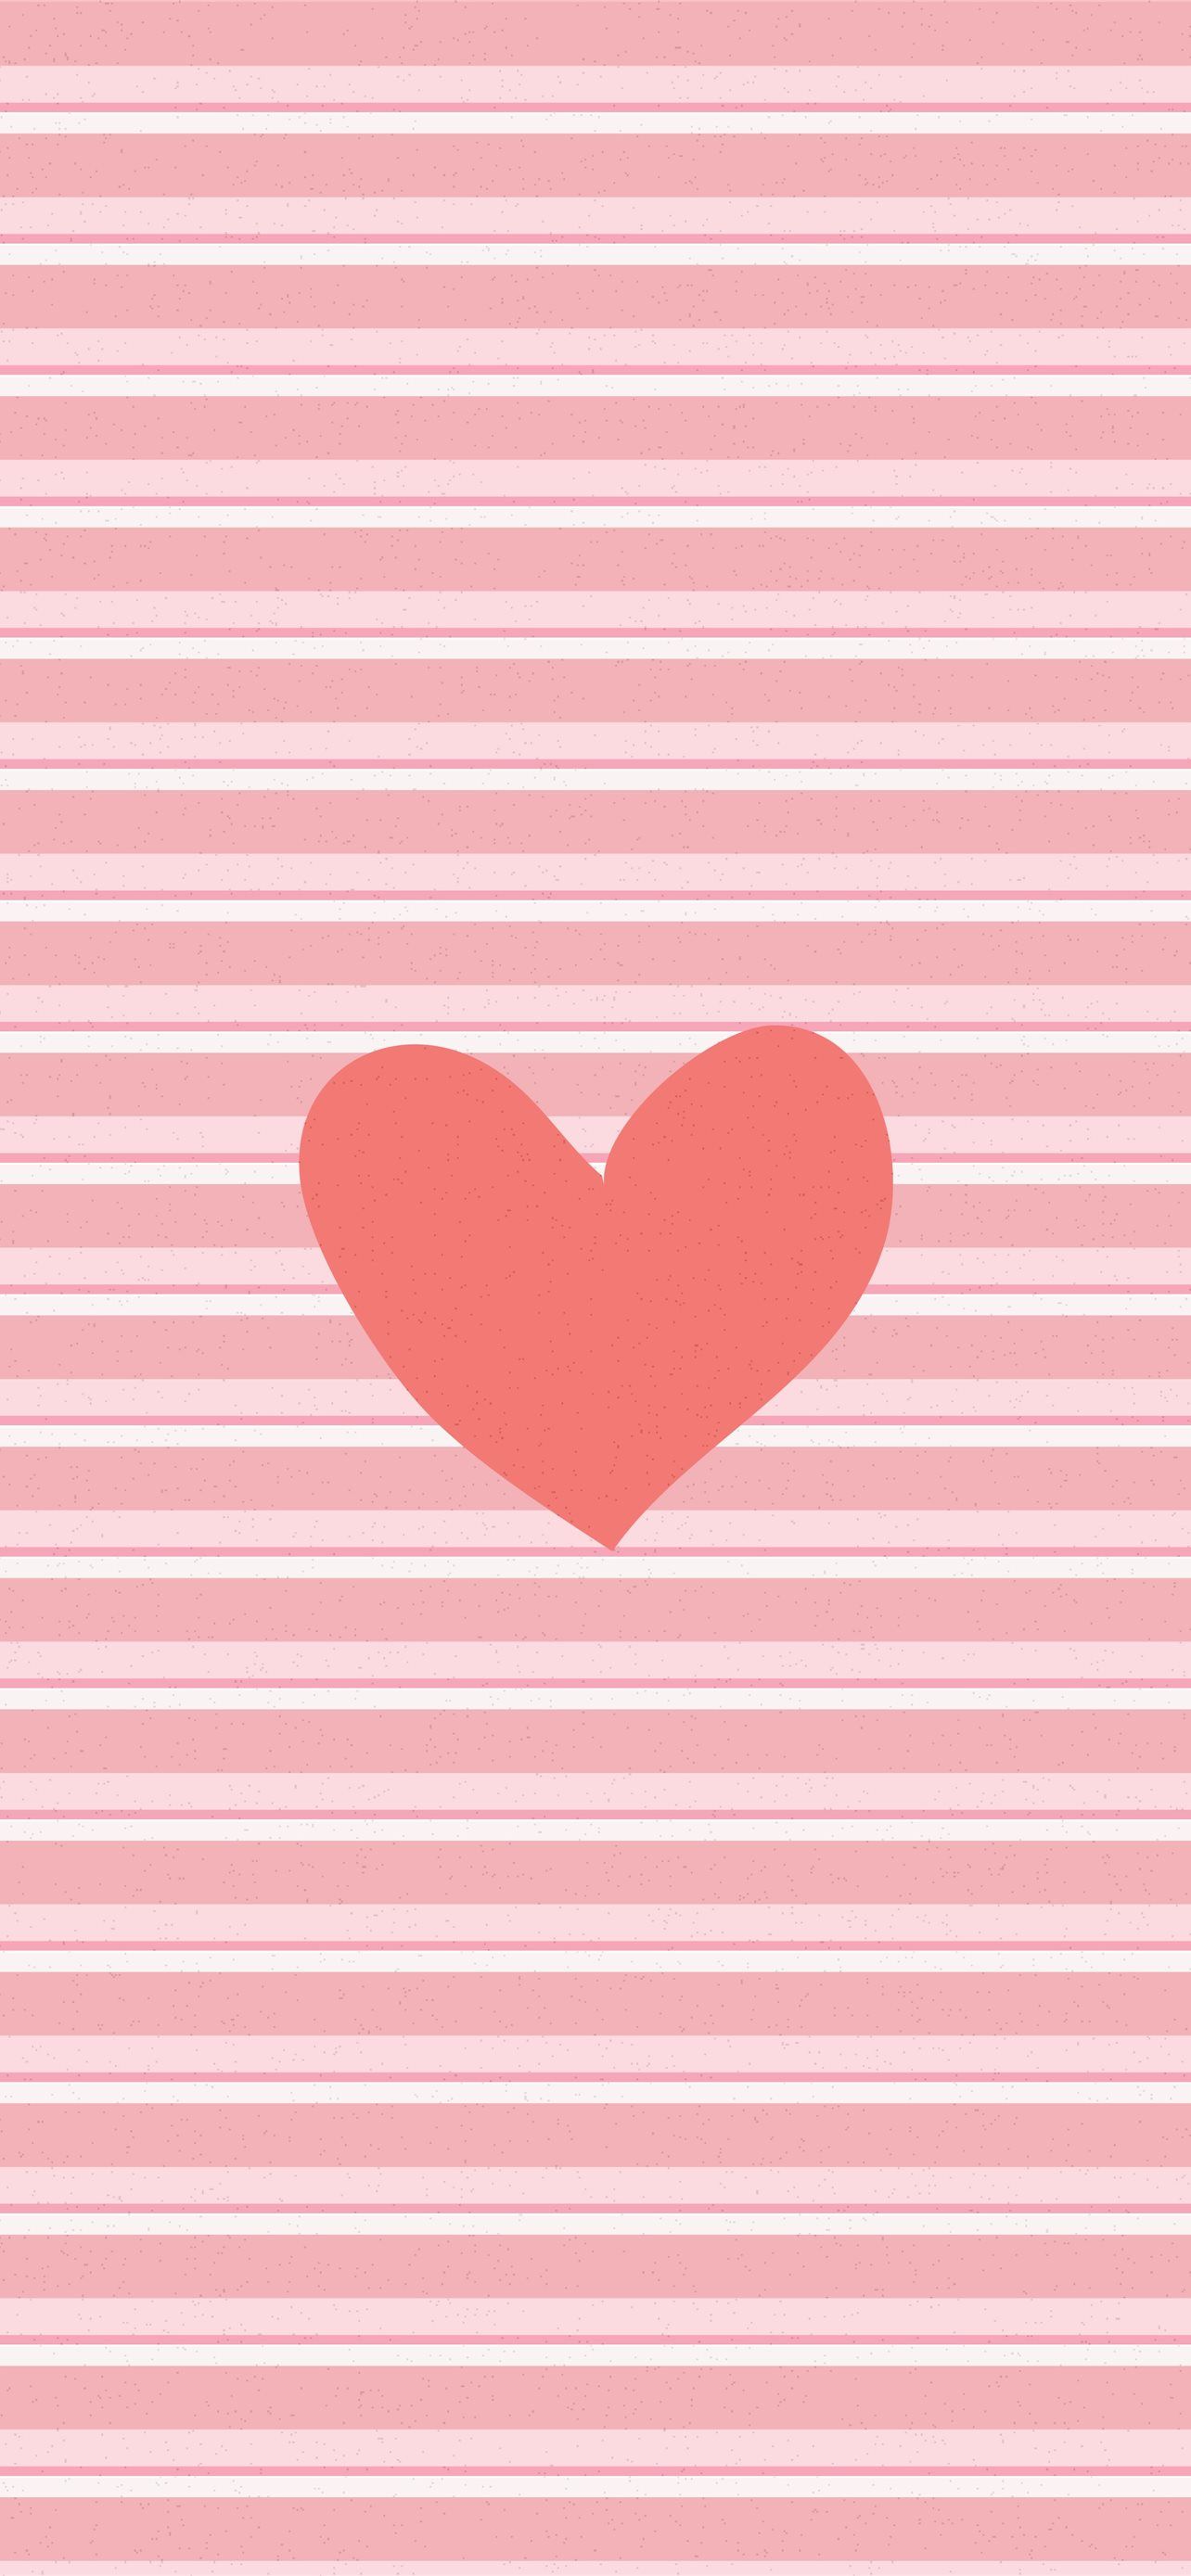 Pink Heart iPhone Wallpaper with high-resolution 1080x1920 pixel. You can use this wallpaper for your iPhone 5, 6, 7, 8, X, XS, XR backgrounds, Mobile Screensaver, or iPad Lock Screen - Valentine's Day